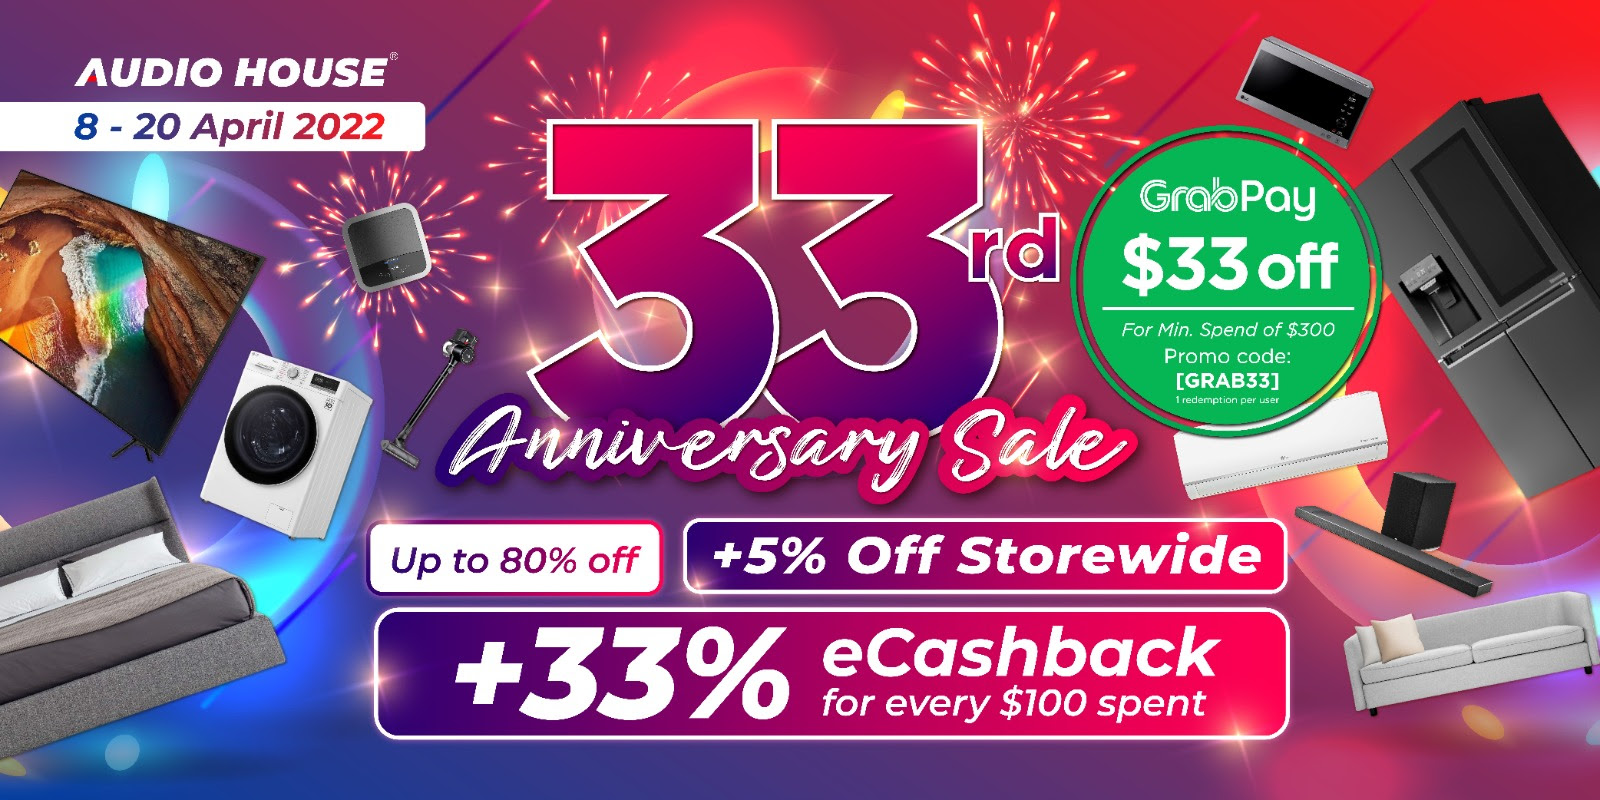 Audio House Celebrates 33rd Anniversary by Offering 5% OFF Storewide + Up to 80% OFF + 33% eCashback